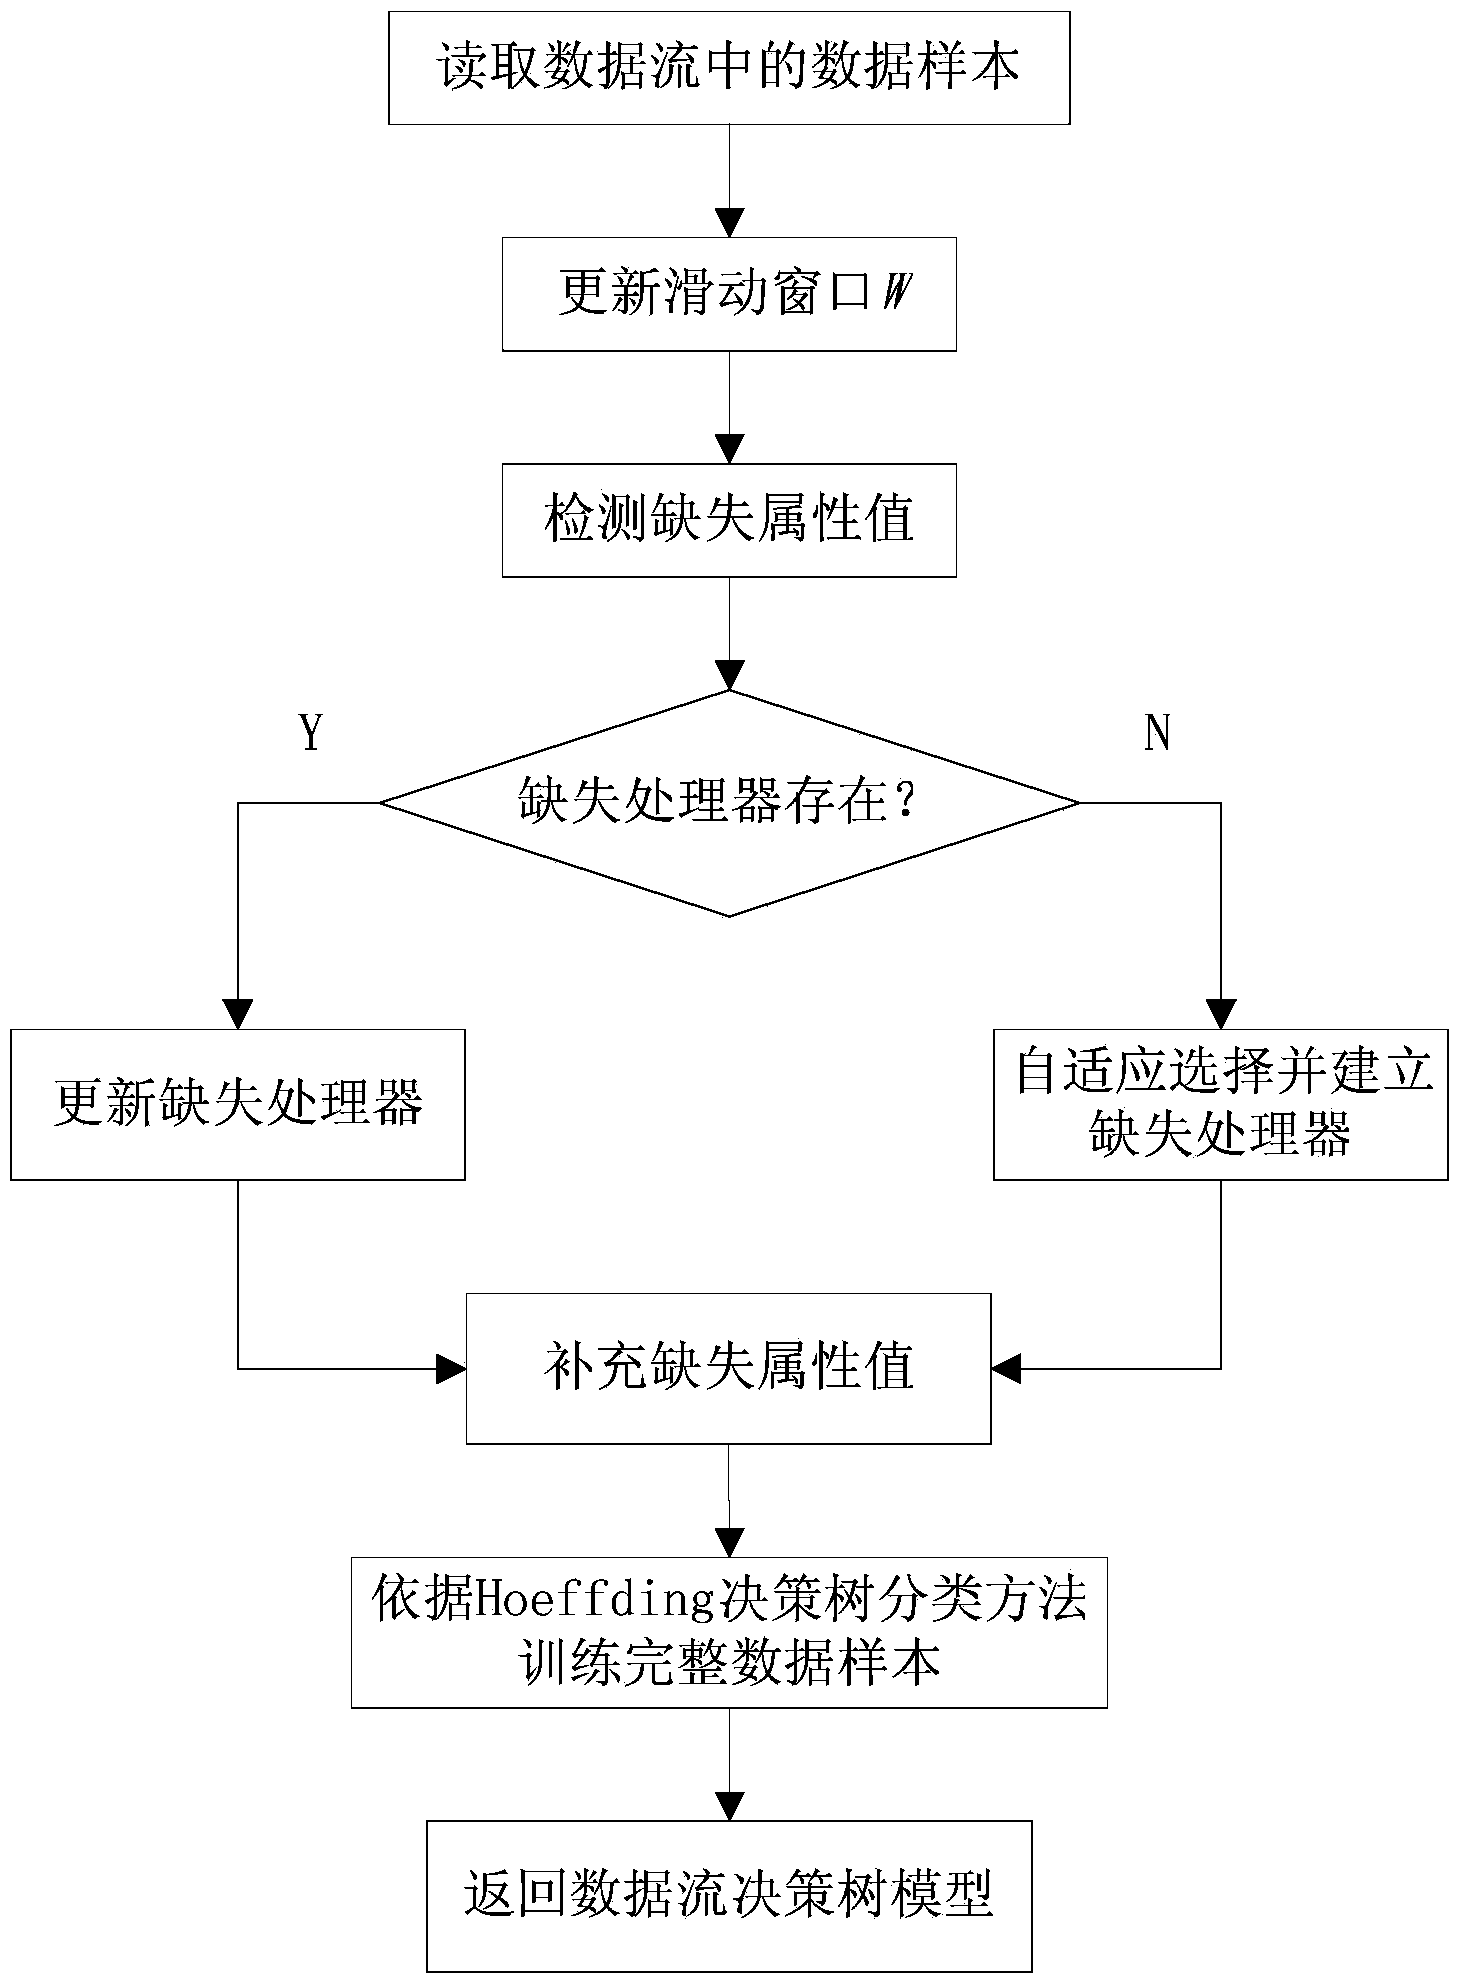 Method for handling missing values during data stream decision tree classification